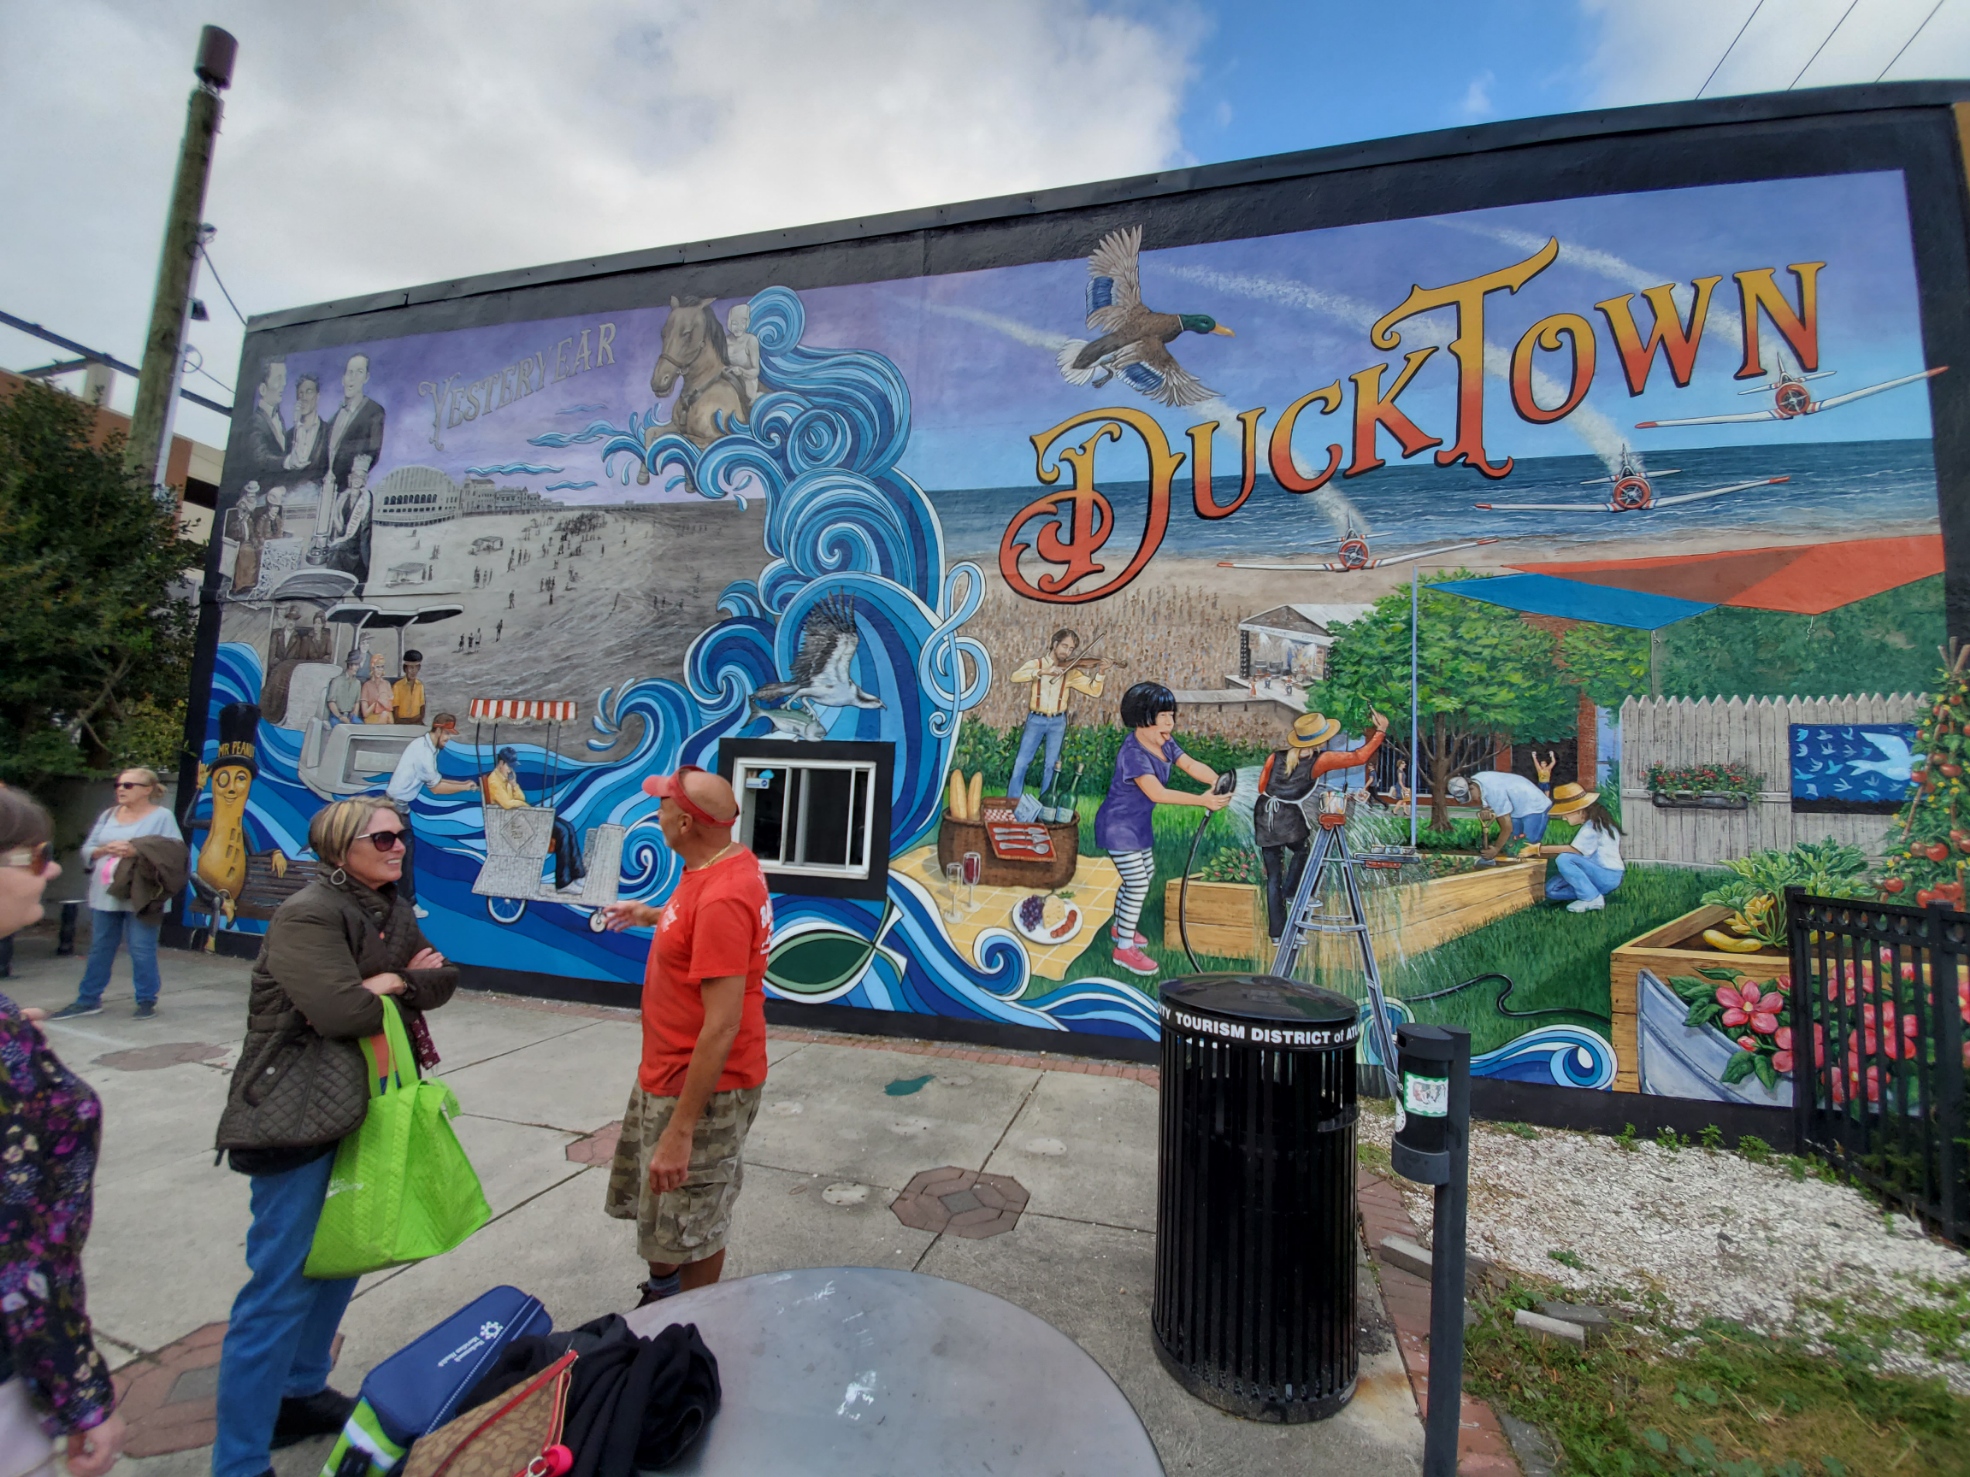 Mural in Atlantic City with group of people